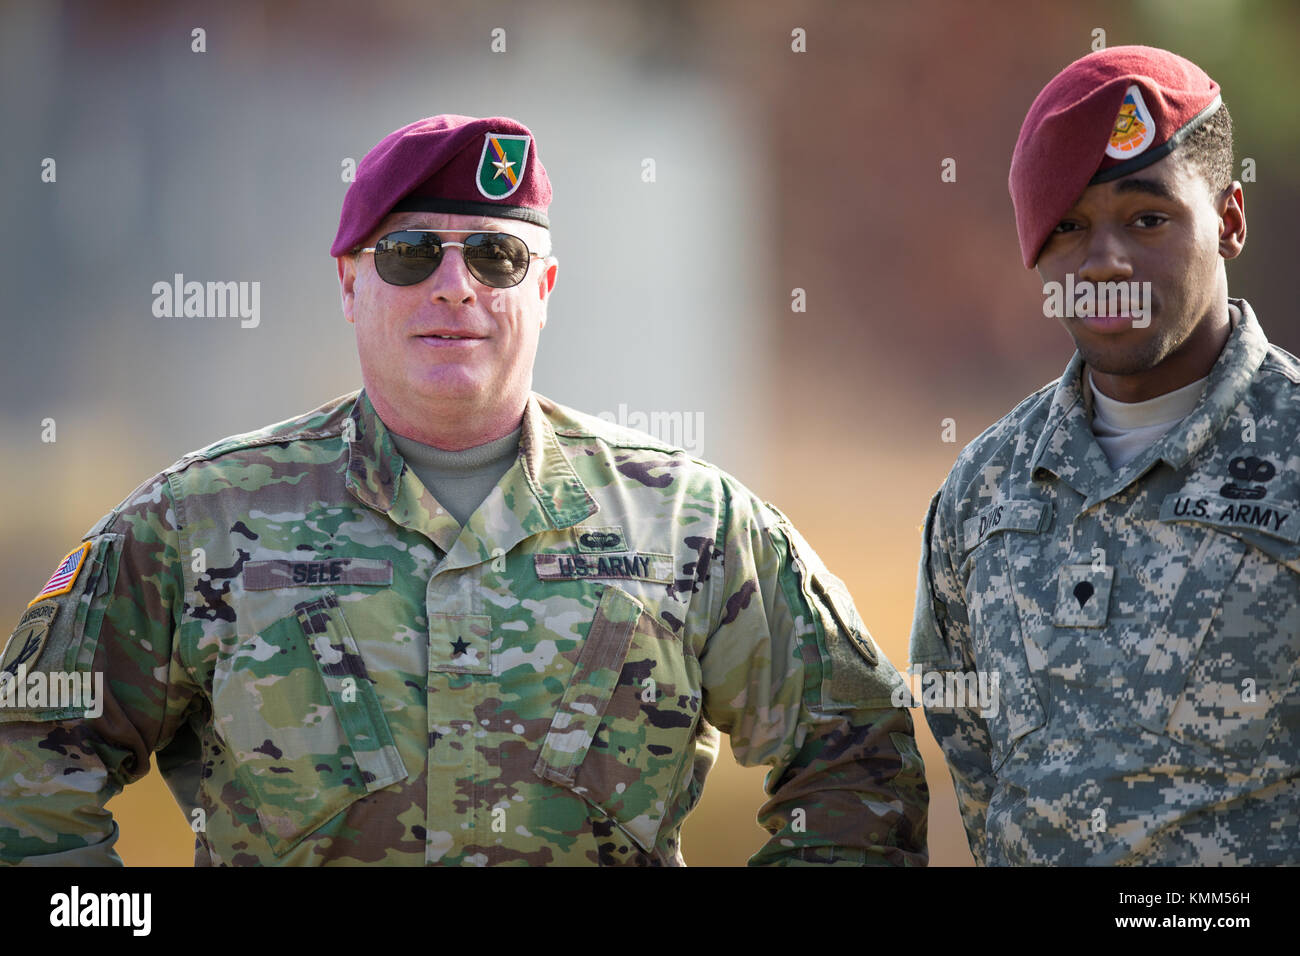 U.S. Army Civil Affairs and Psychological Operations Command Deputy Commanding General Richard Sele (left) talks to a U.S. Army soldier during the 20th annual Randy Oler Memorial Operation Toy Drop at the MacKall Army Airfield December 4, 2017 in Hoffman, North Carolina.  (photo by Jesse L. Artis via Planetpix) Stock Photo